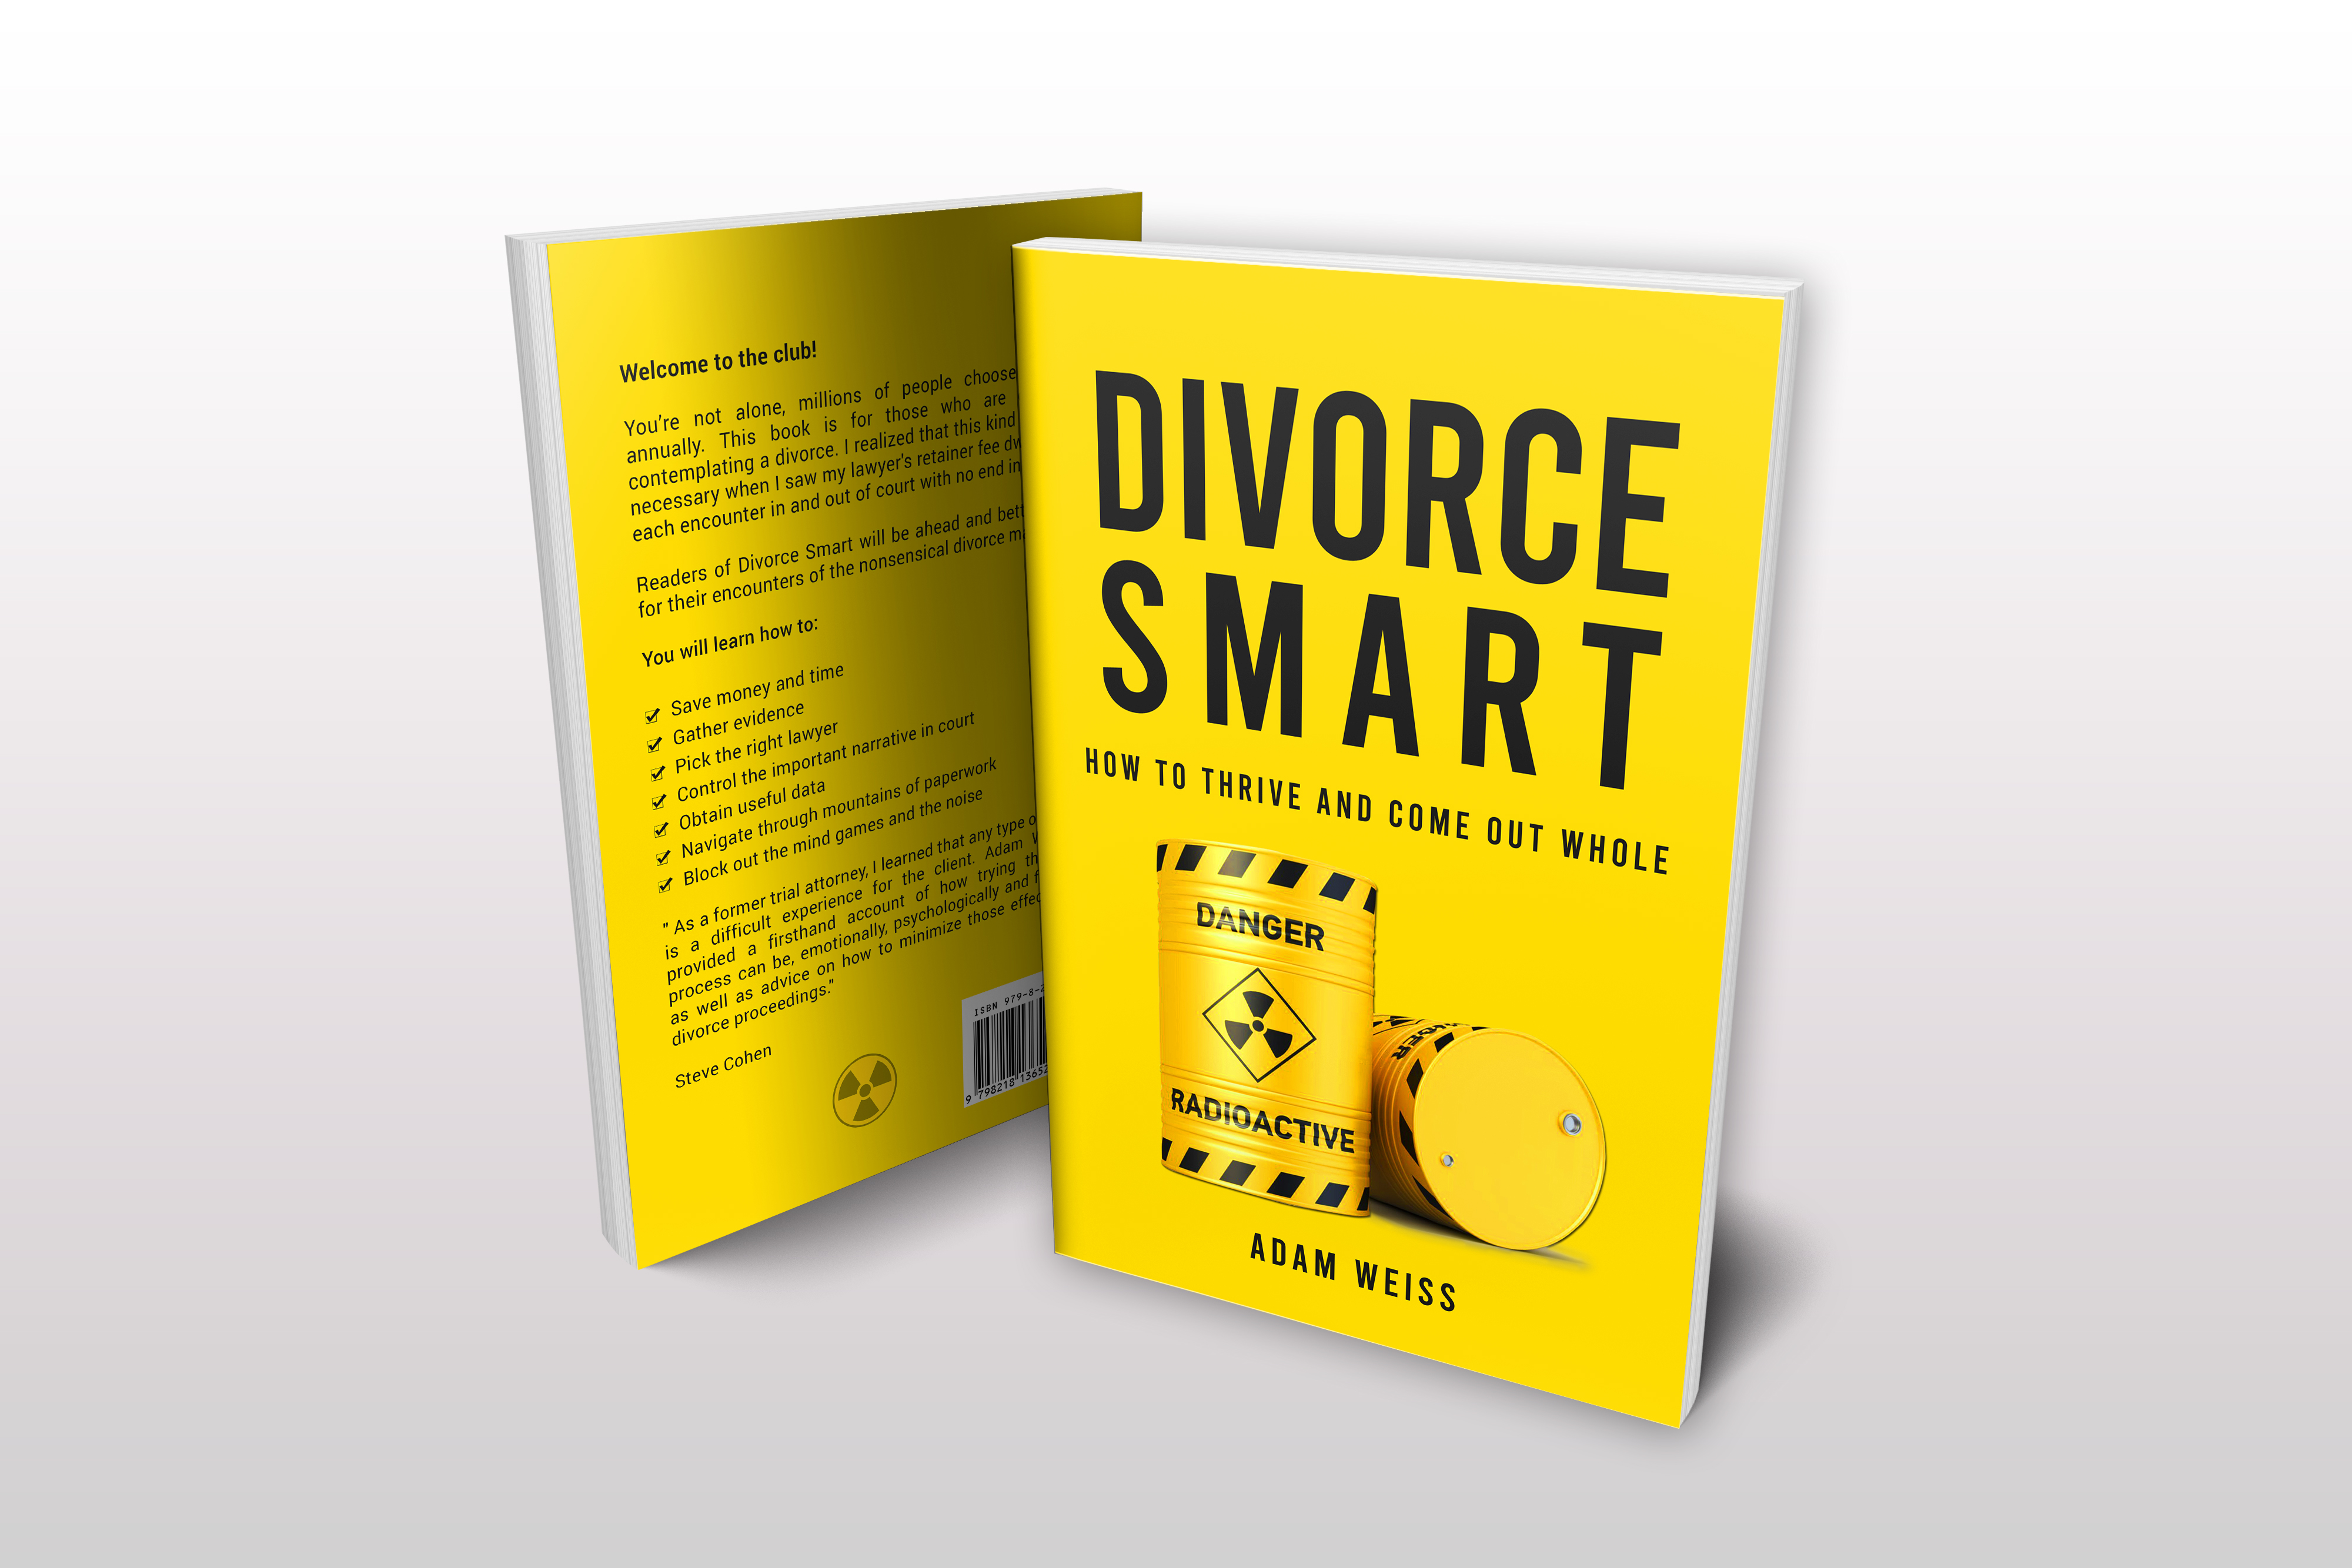 Divorce Smart: A Must-Read Guide for Anyone Facing a Divorce